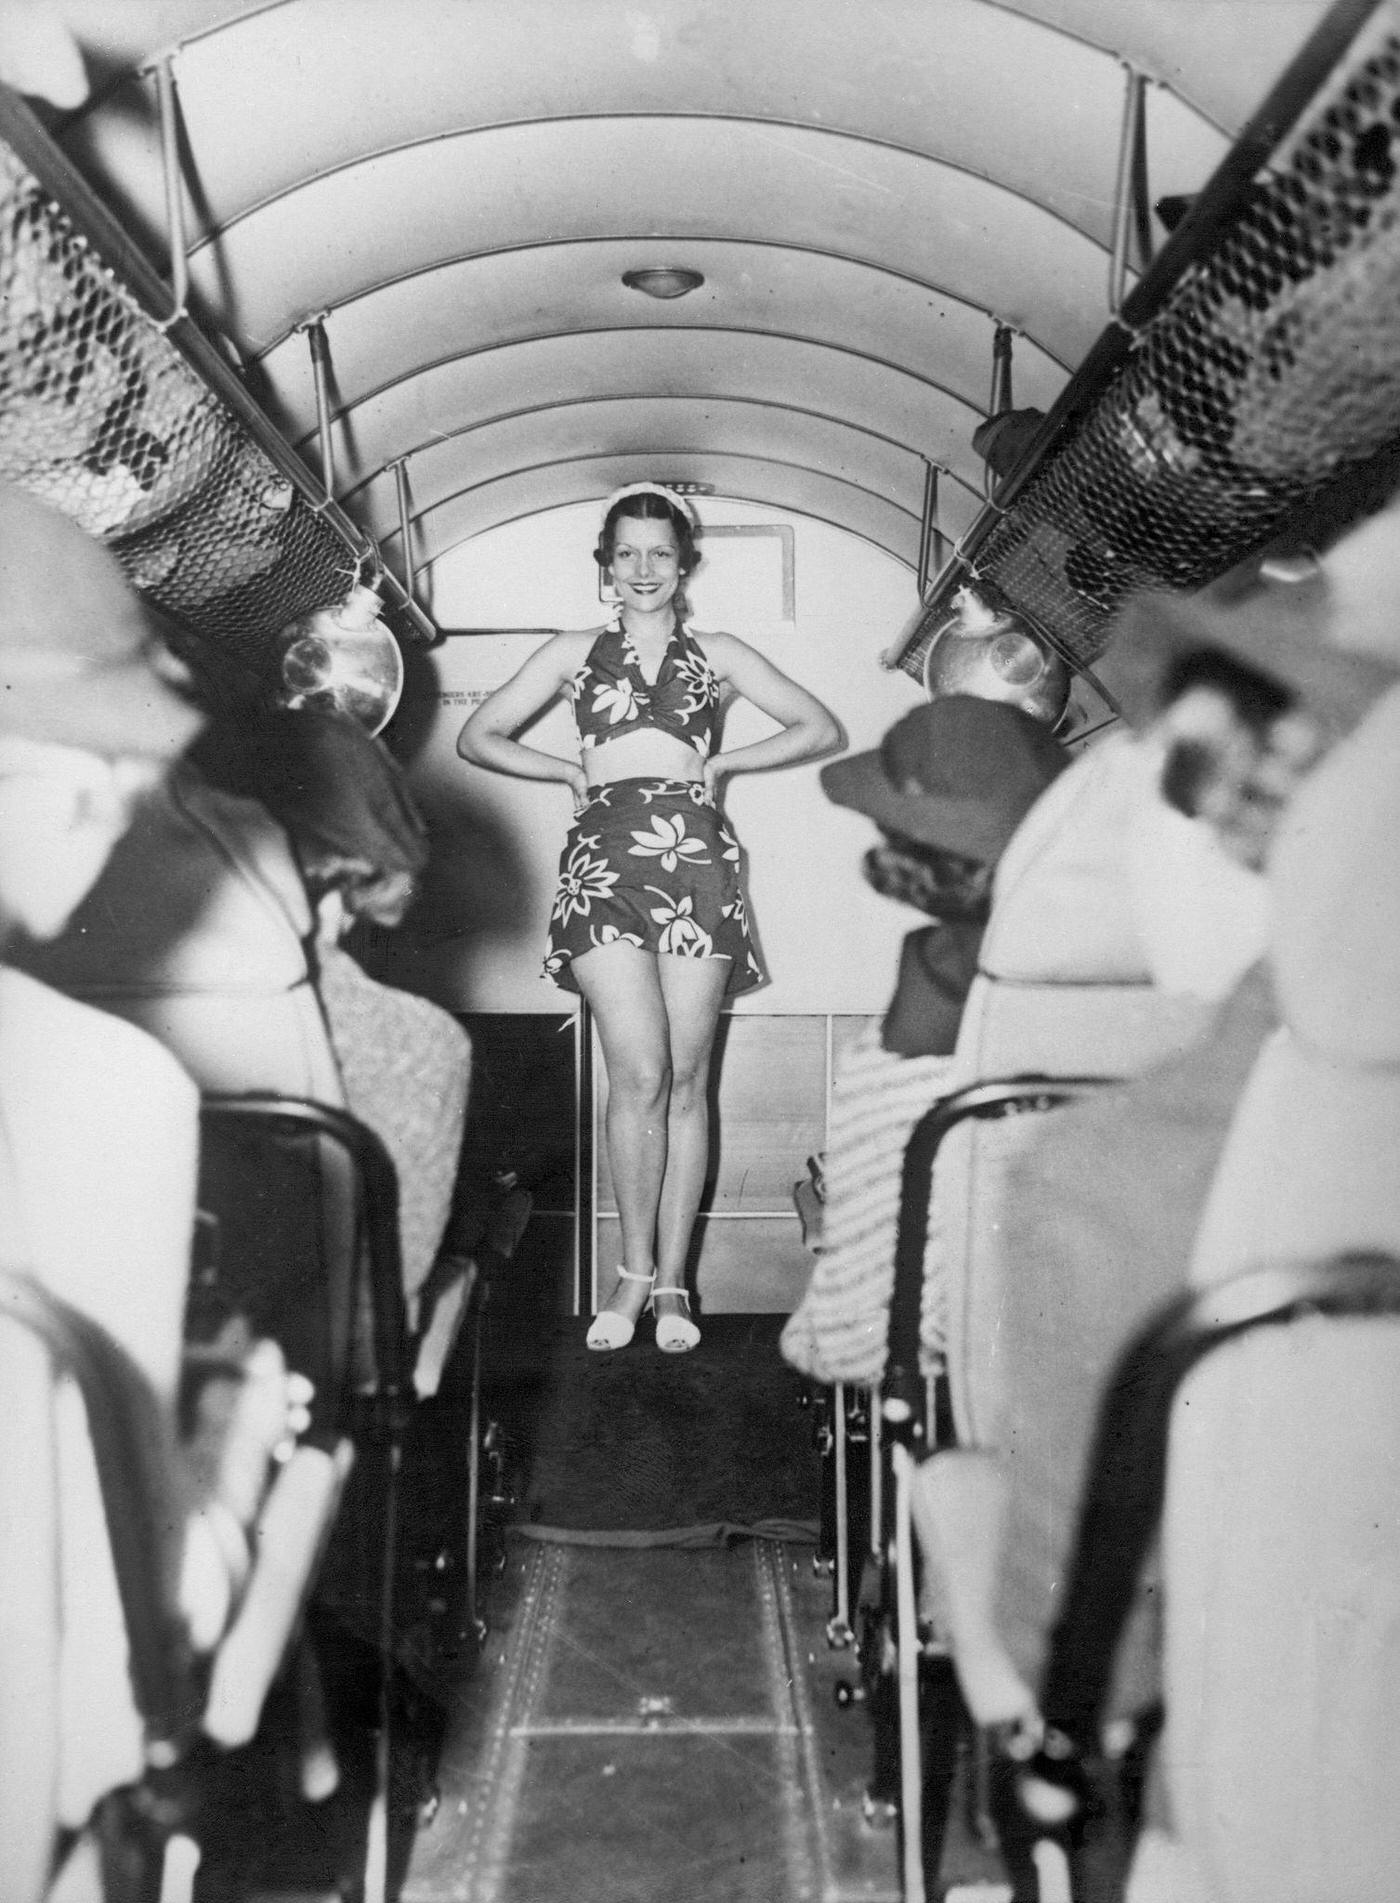 Passengers on a flight from New York to Miami are entertained with a fashion show featuring the latest beachwear in the air, 1930.